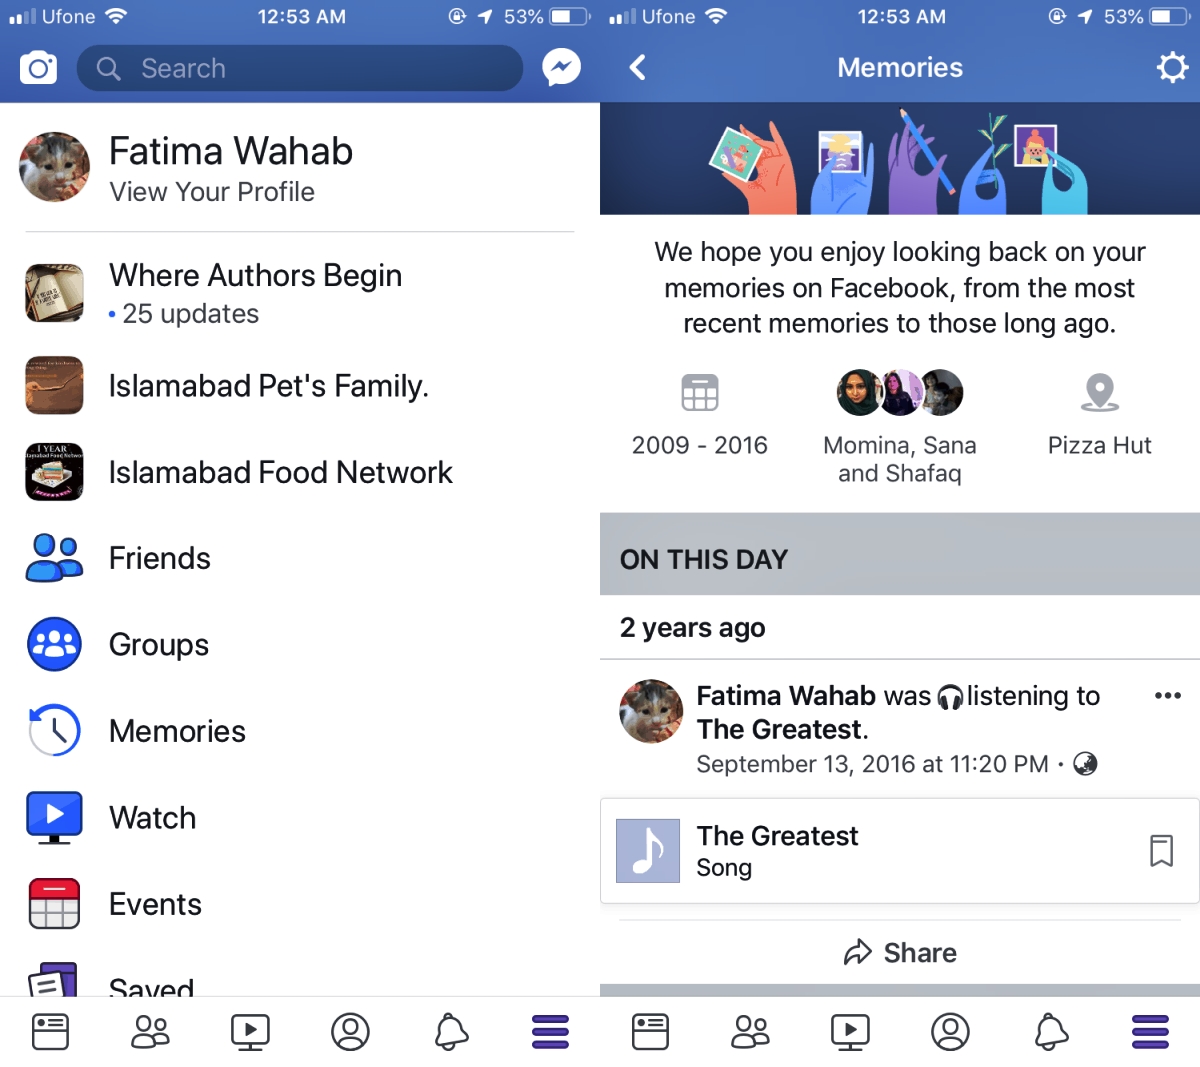 how-to-turn-off-facebook-on-this-day-memories-on-iphone